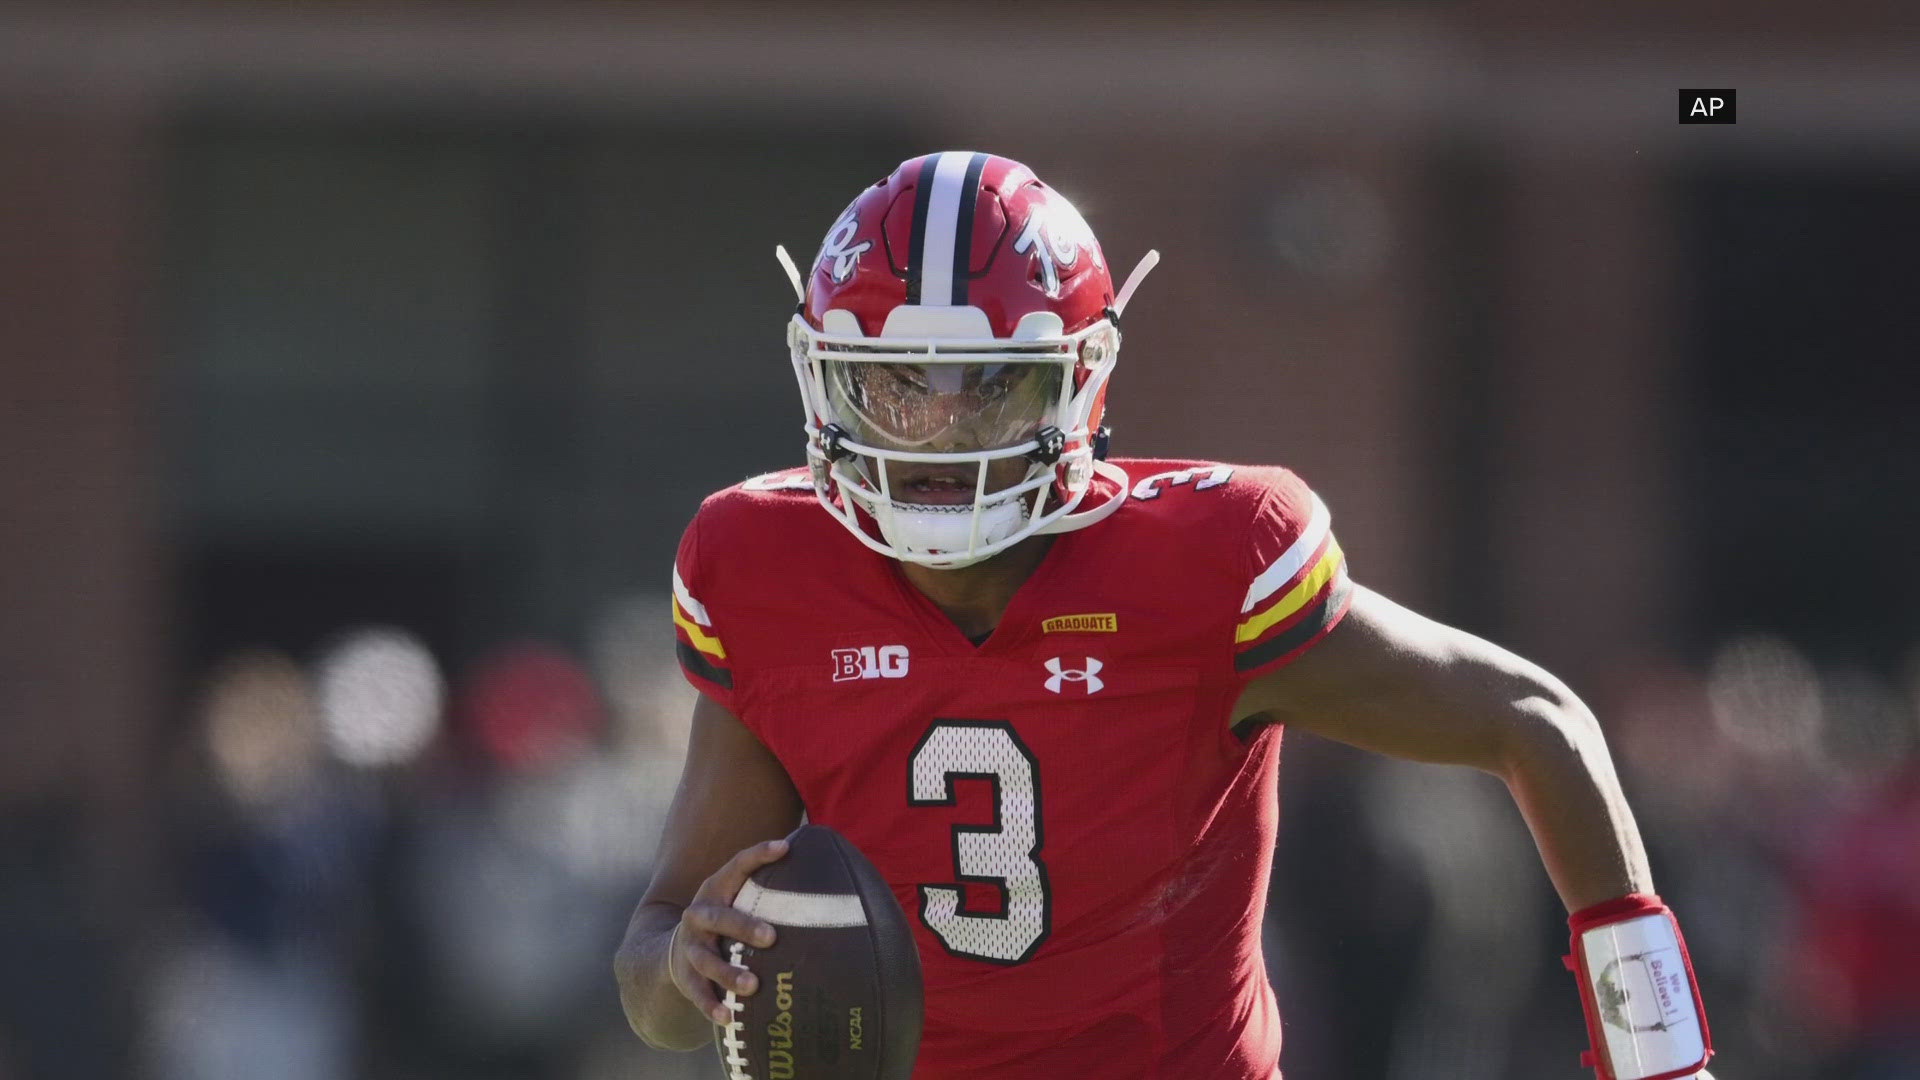 The former Maryland Terrapin was not among the quarterbacks selected during the NFL Draft